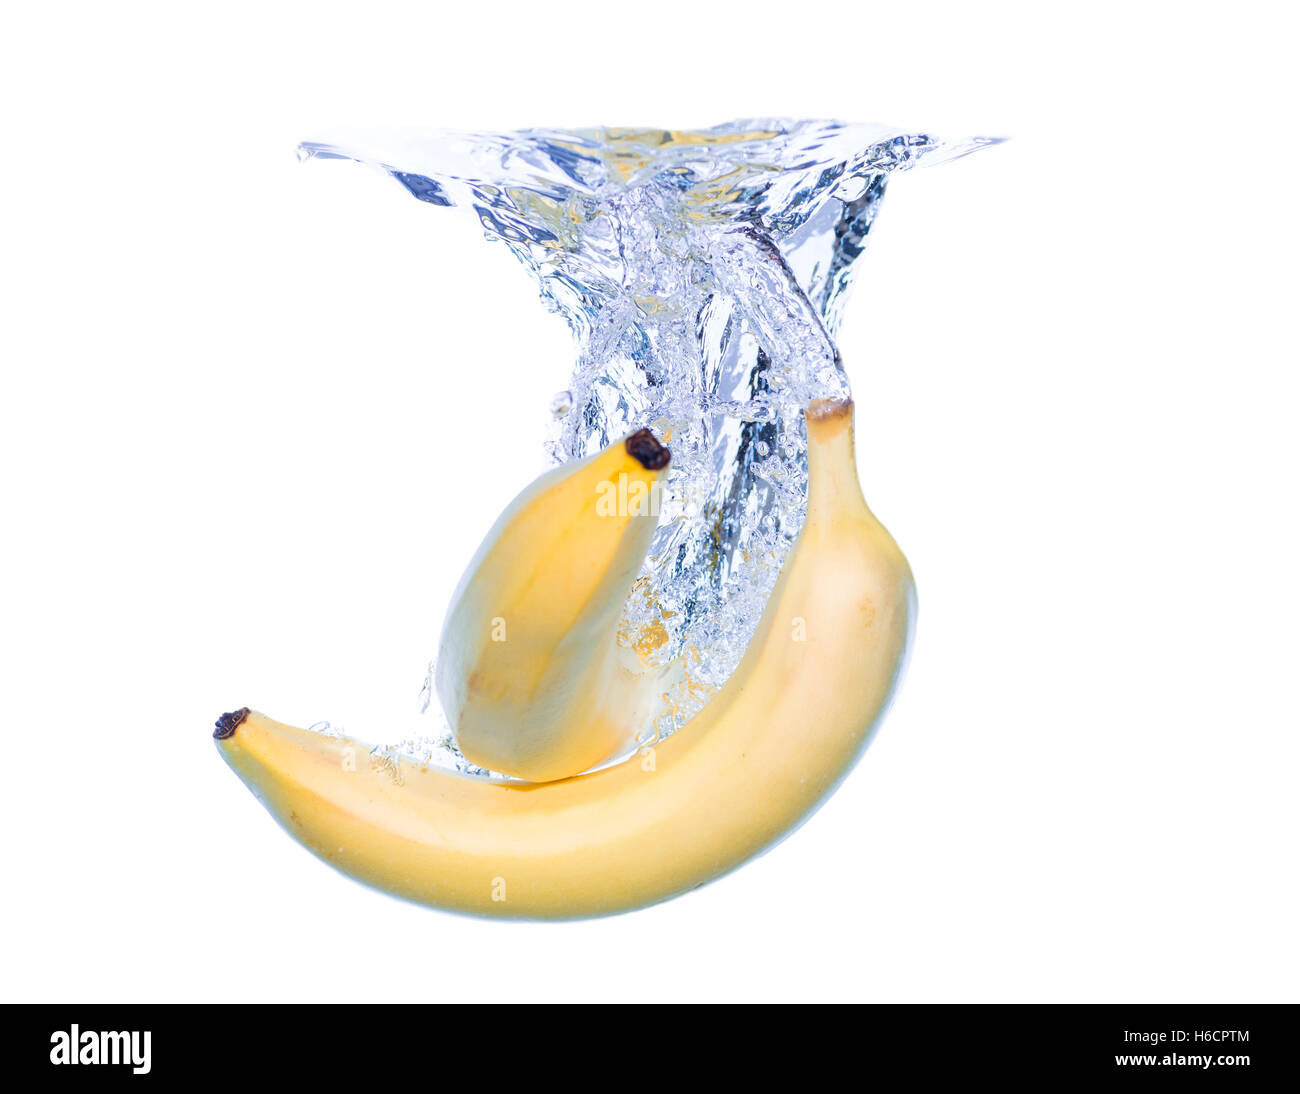 Bananas In Water On An Isolated Backdrop Stock Photo